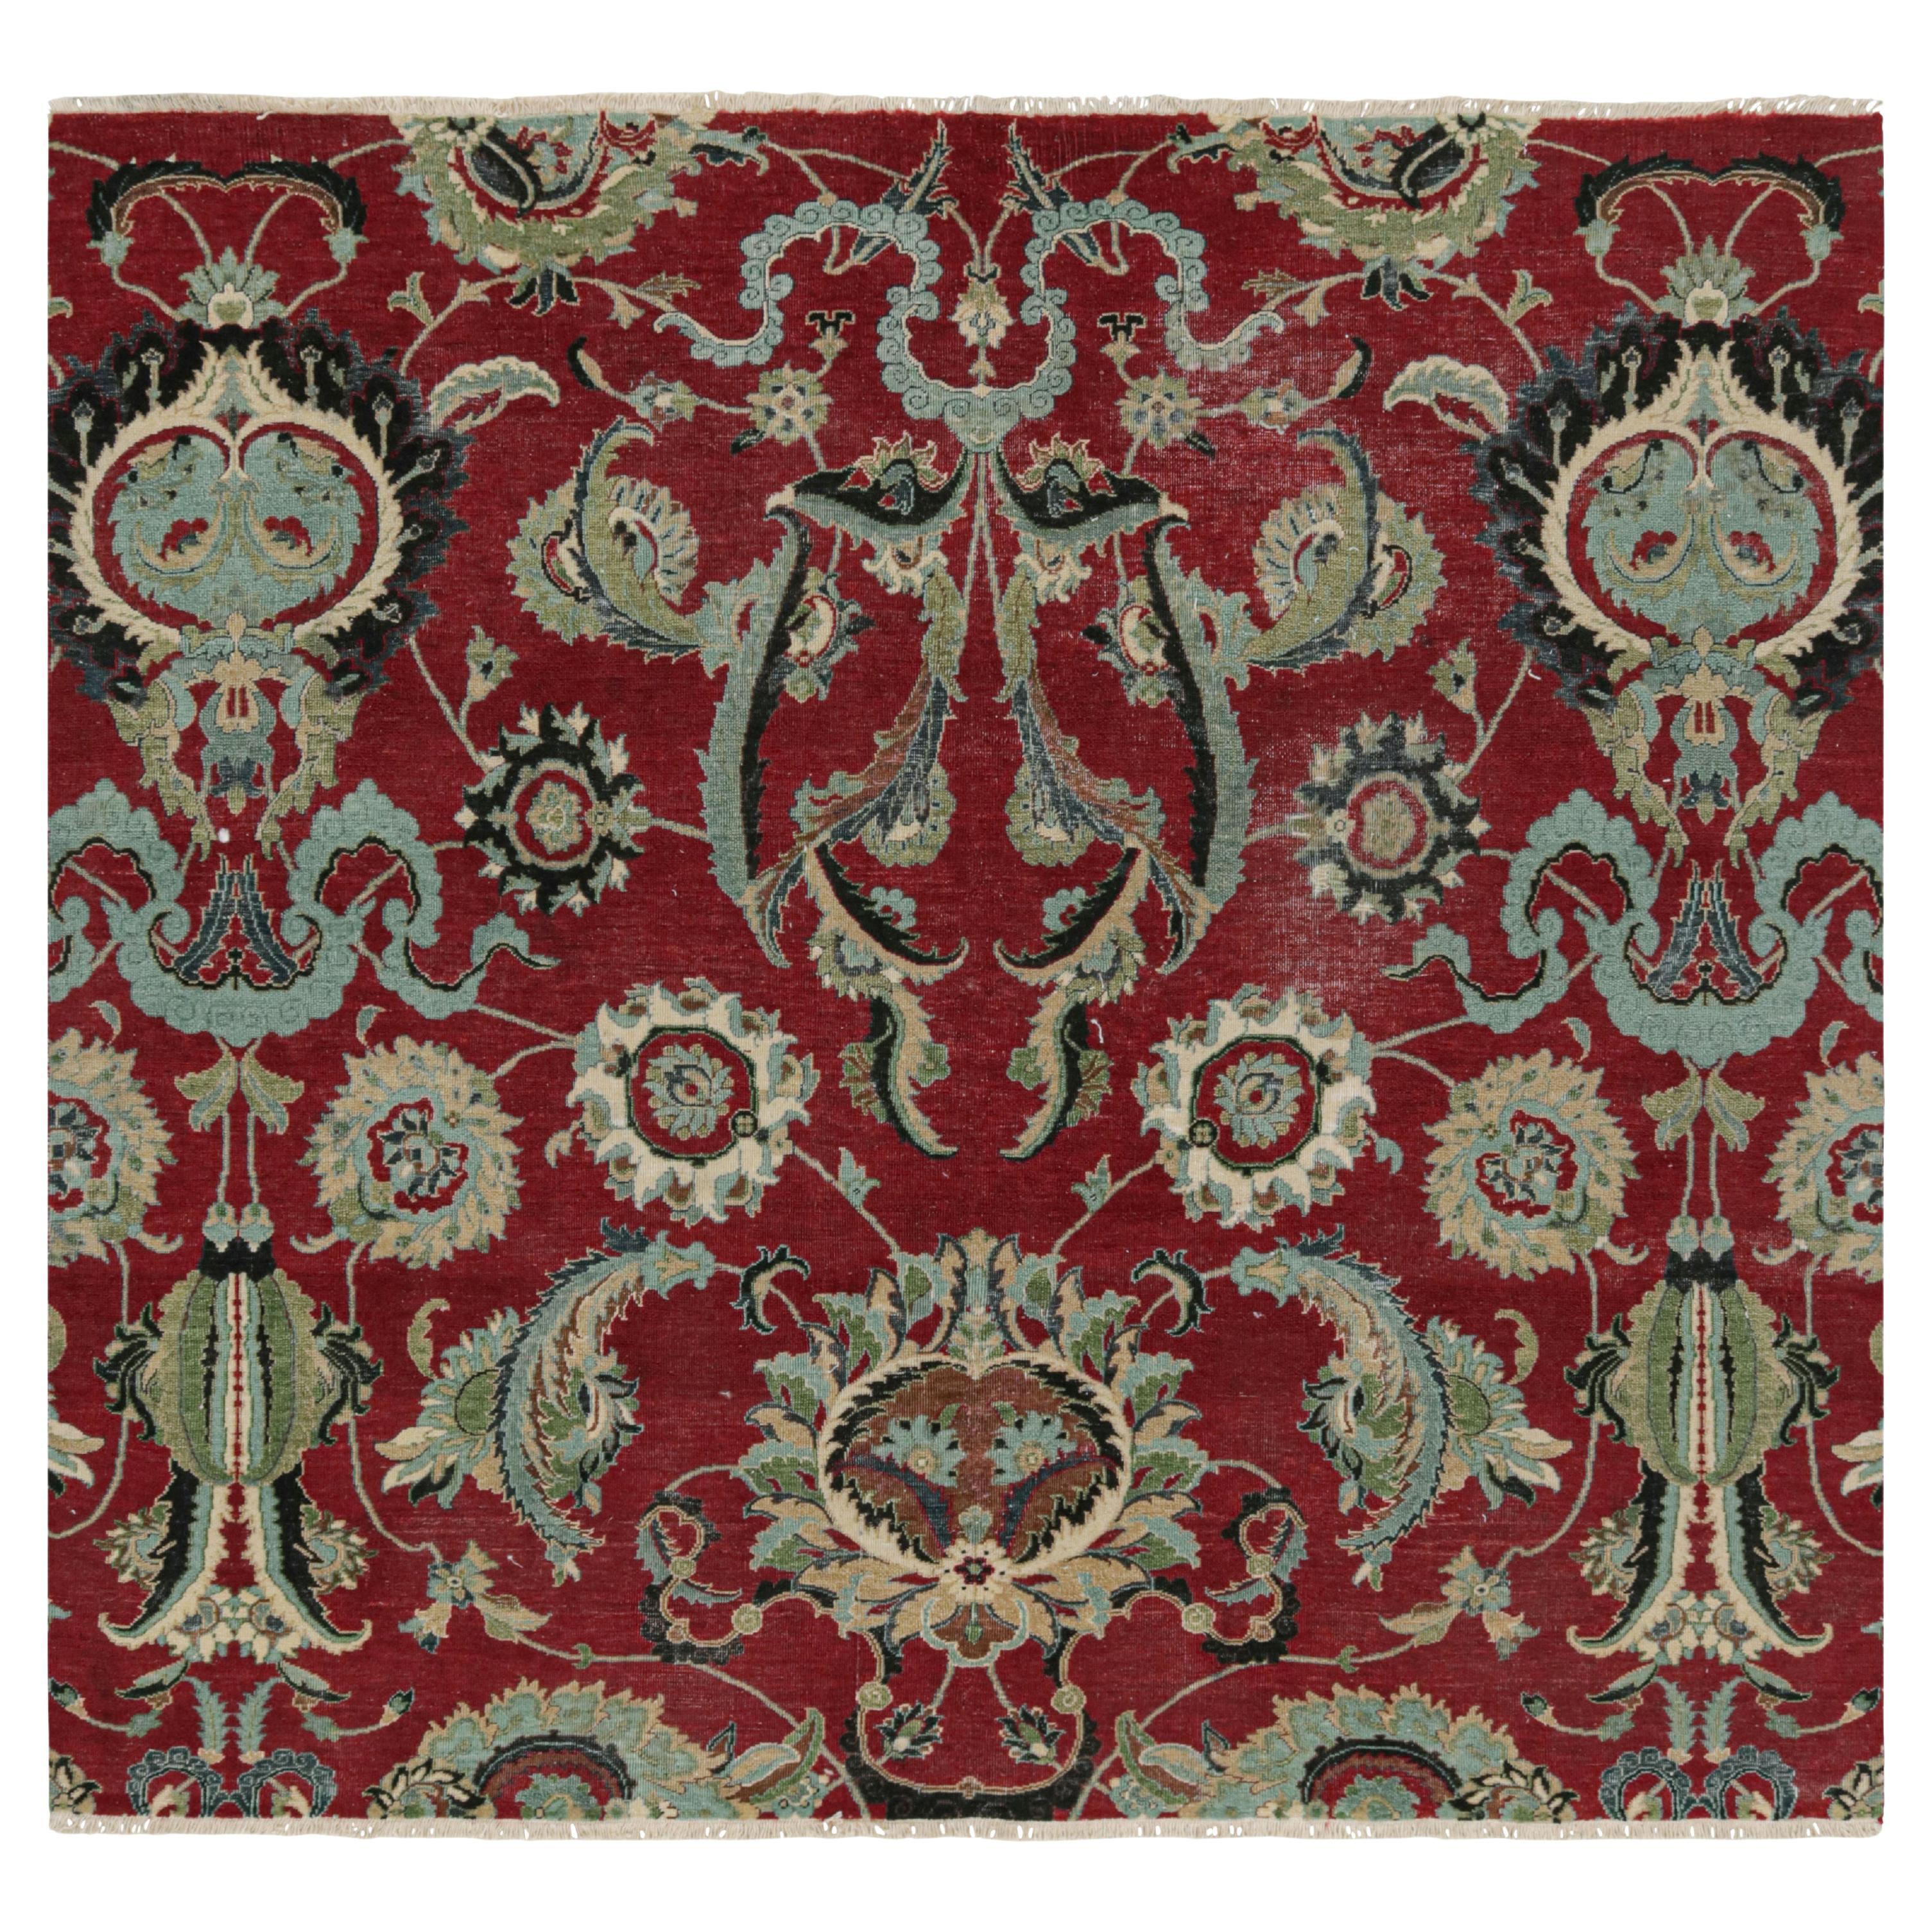 Rug & Kilim’s Persian Isfahan Style Square Rug in Burgundy with Floral Patterns